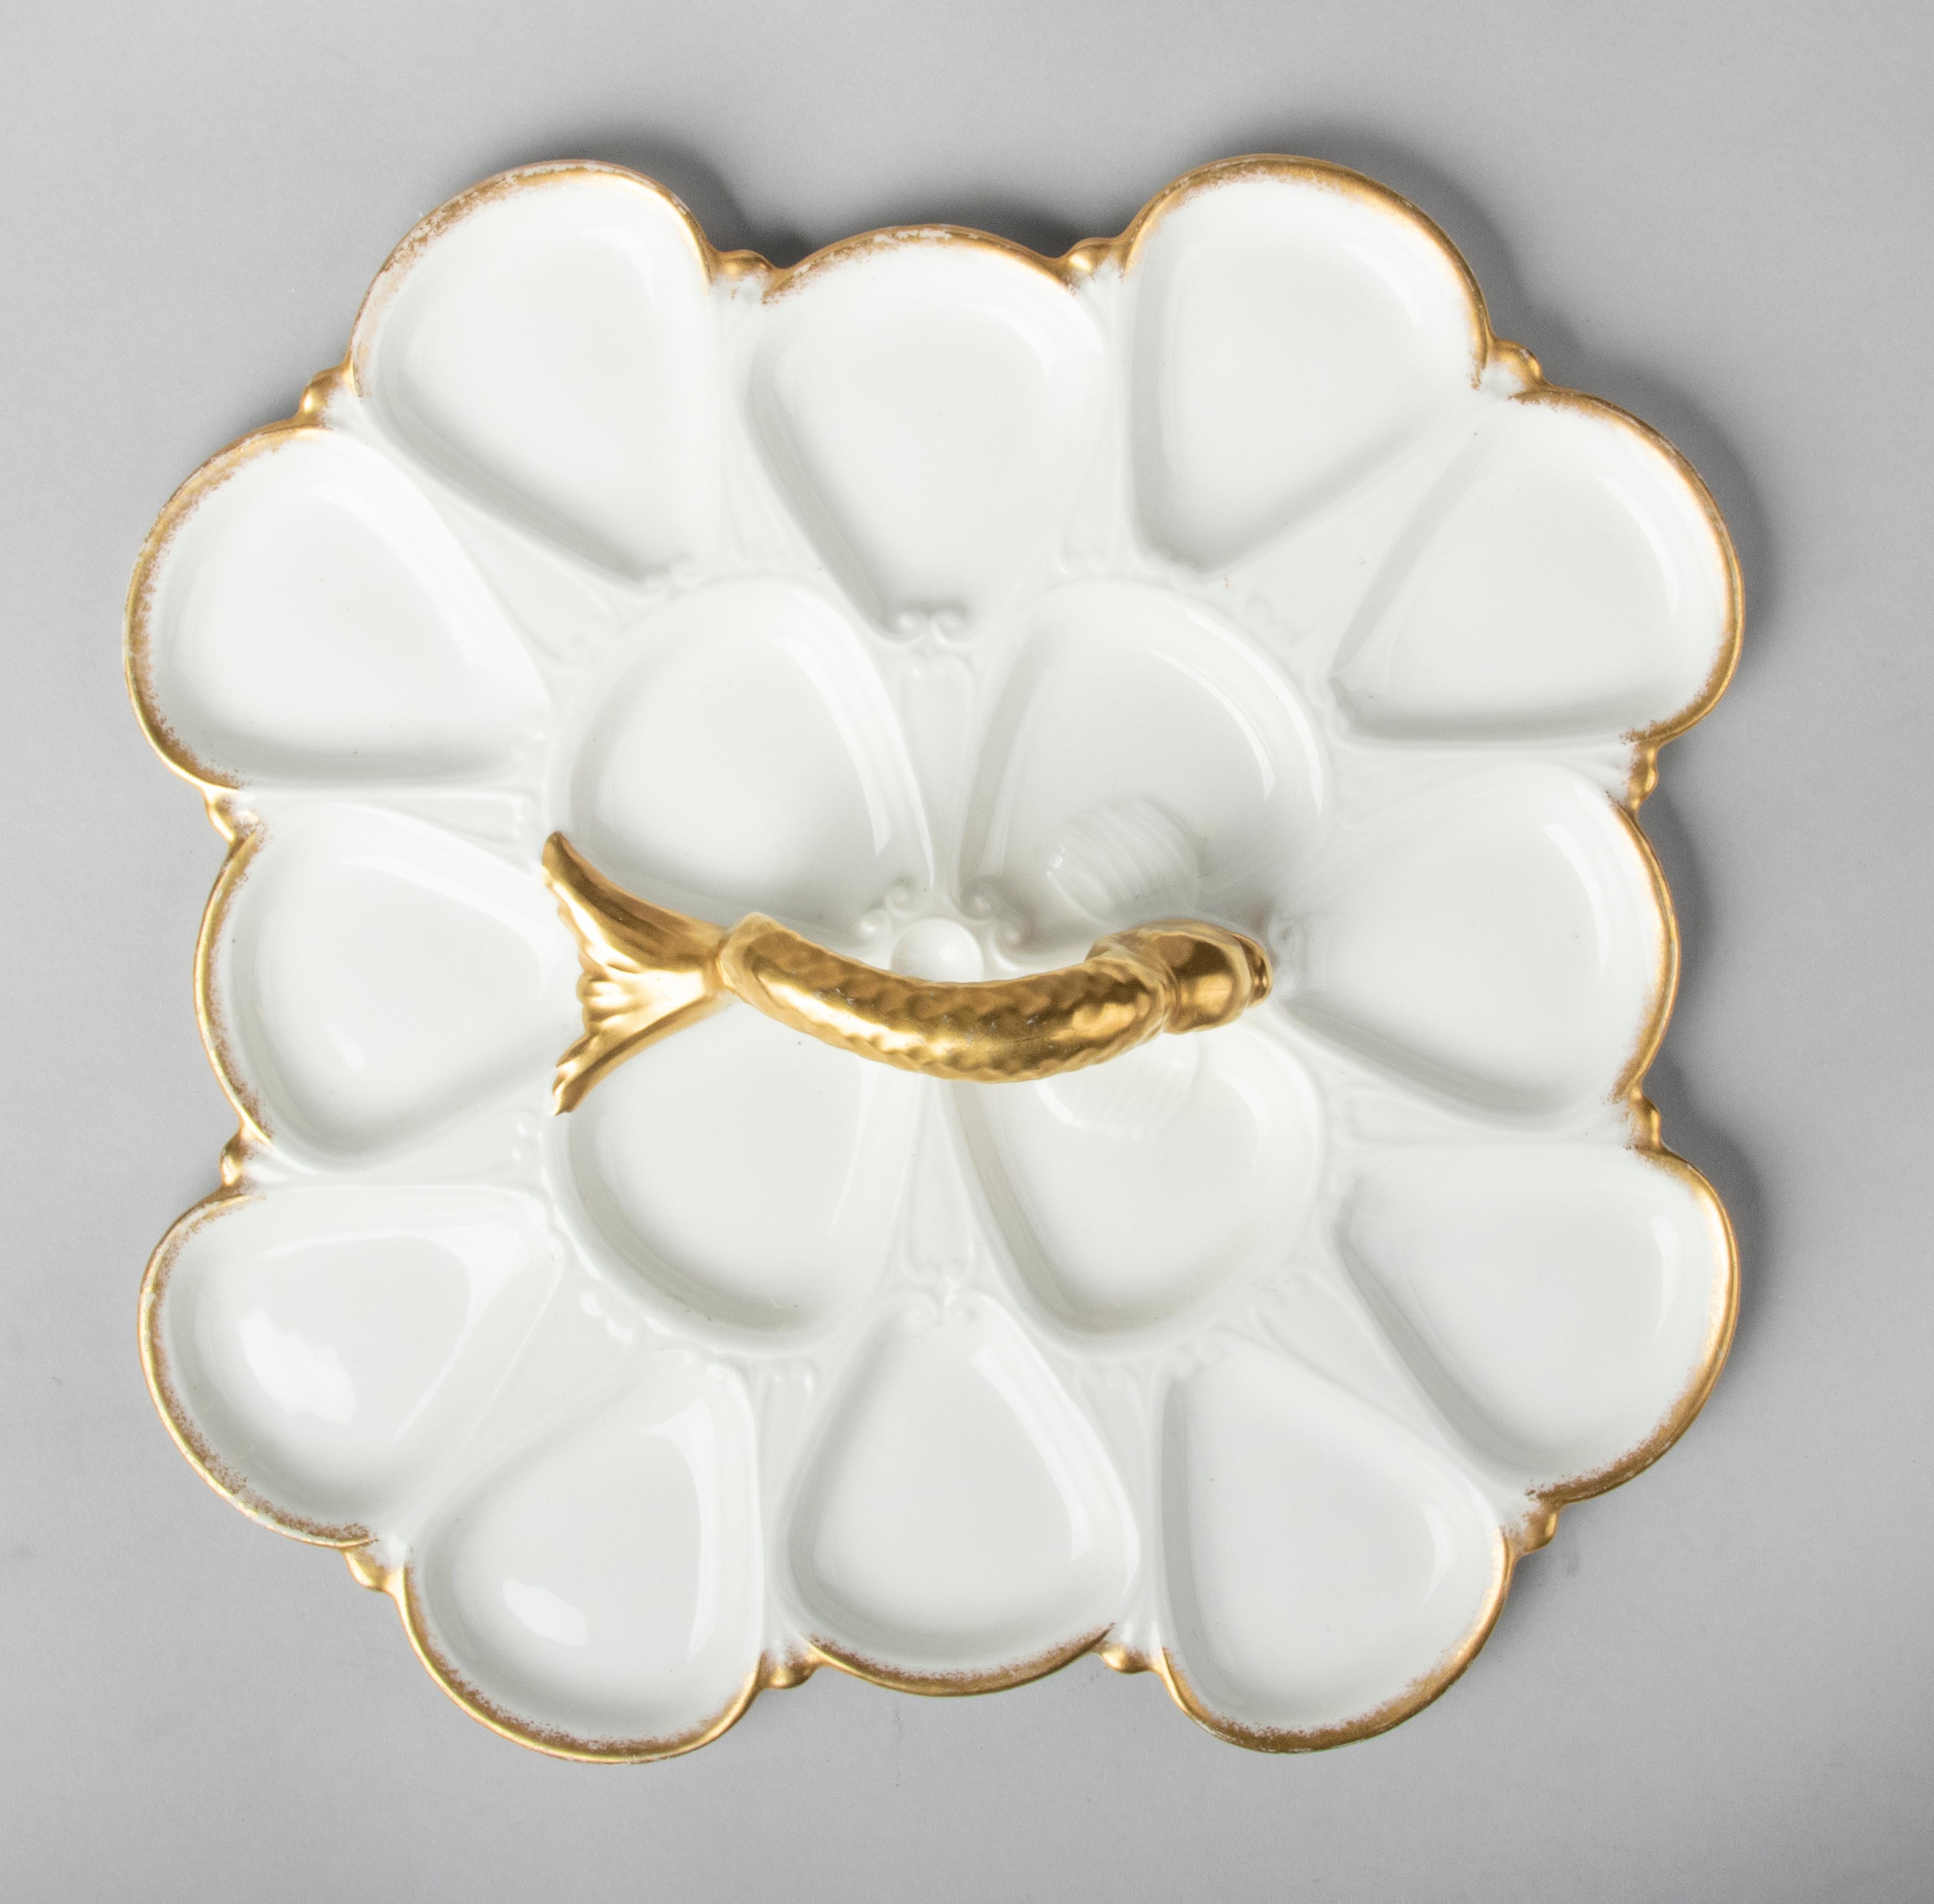 Hand-Crafted 19th Century Oyster Serving Plate by Limoges